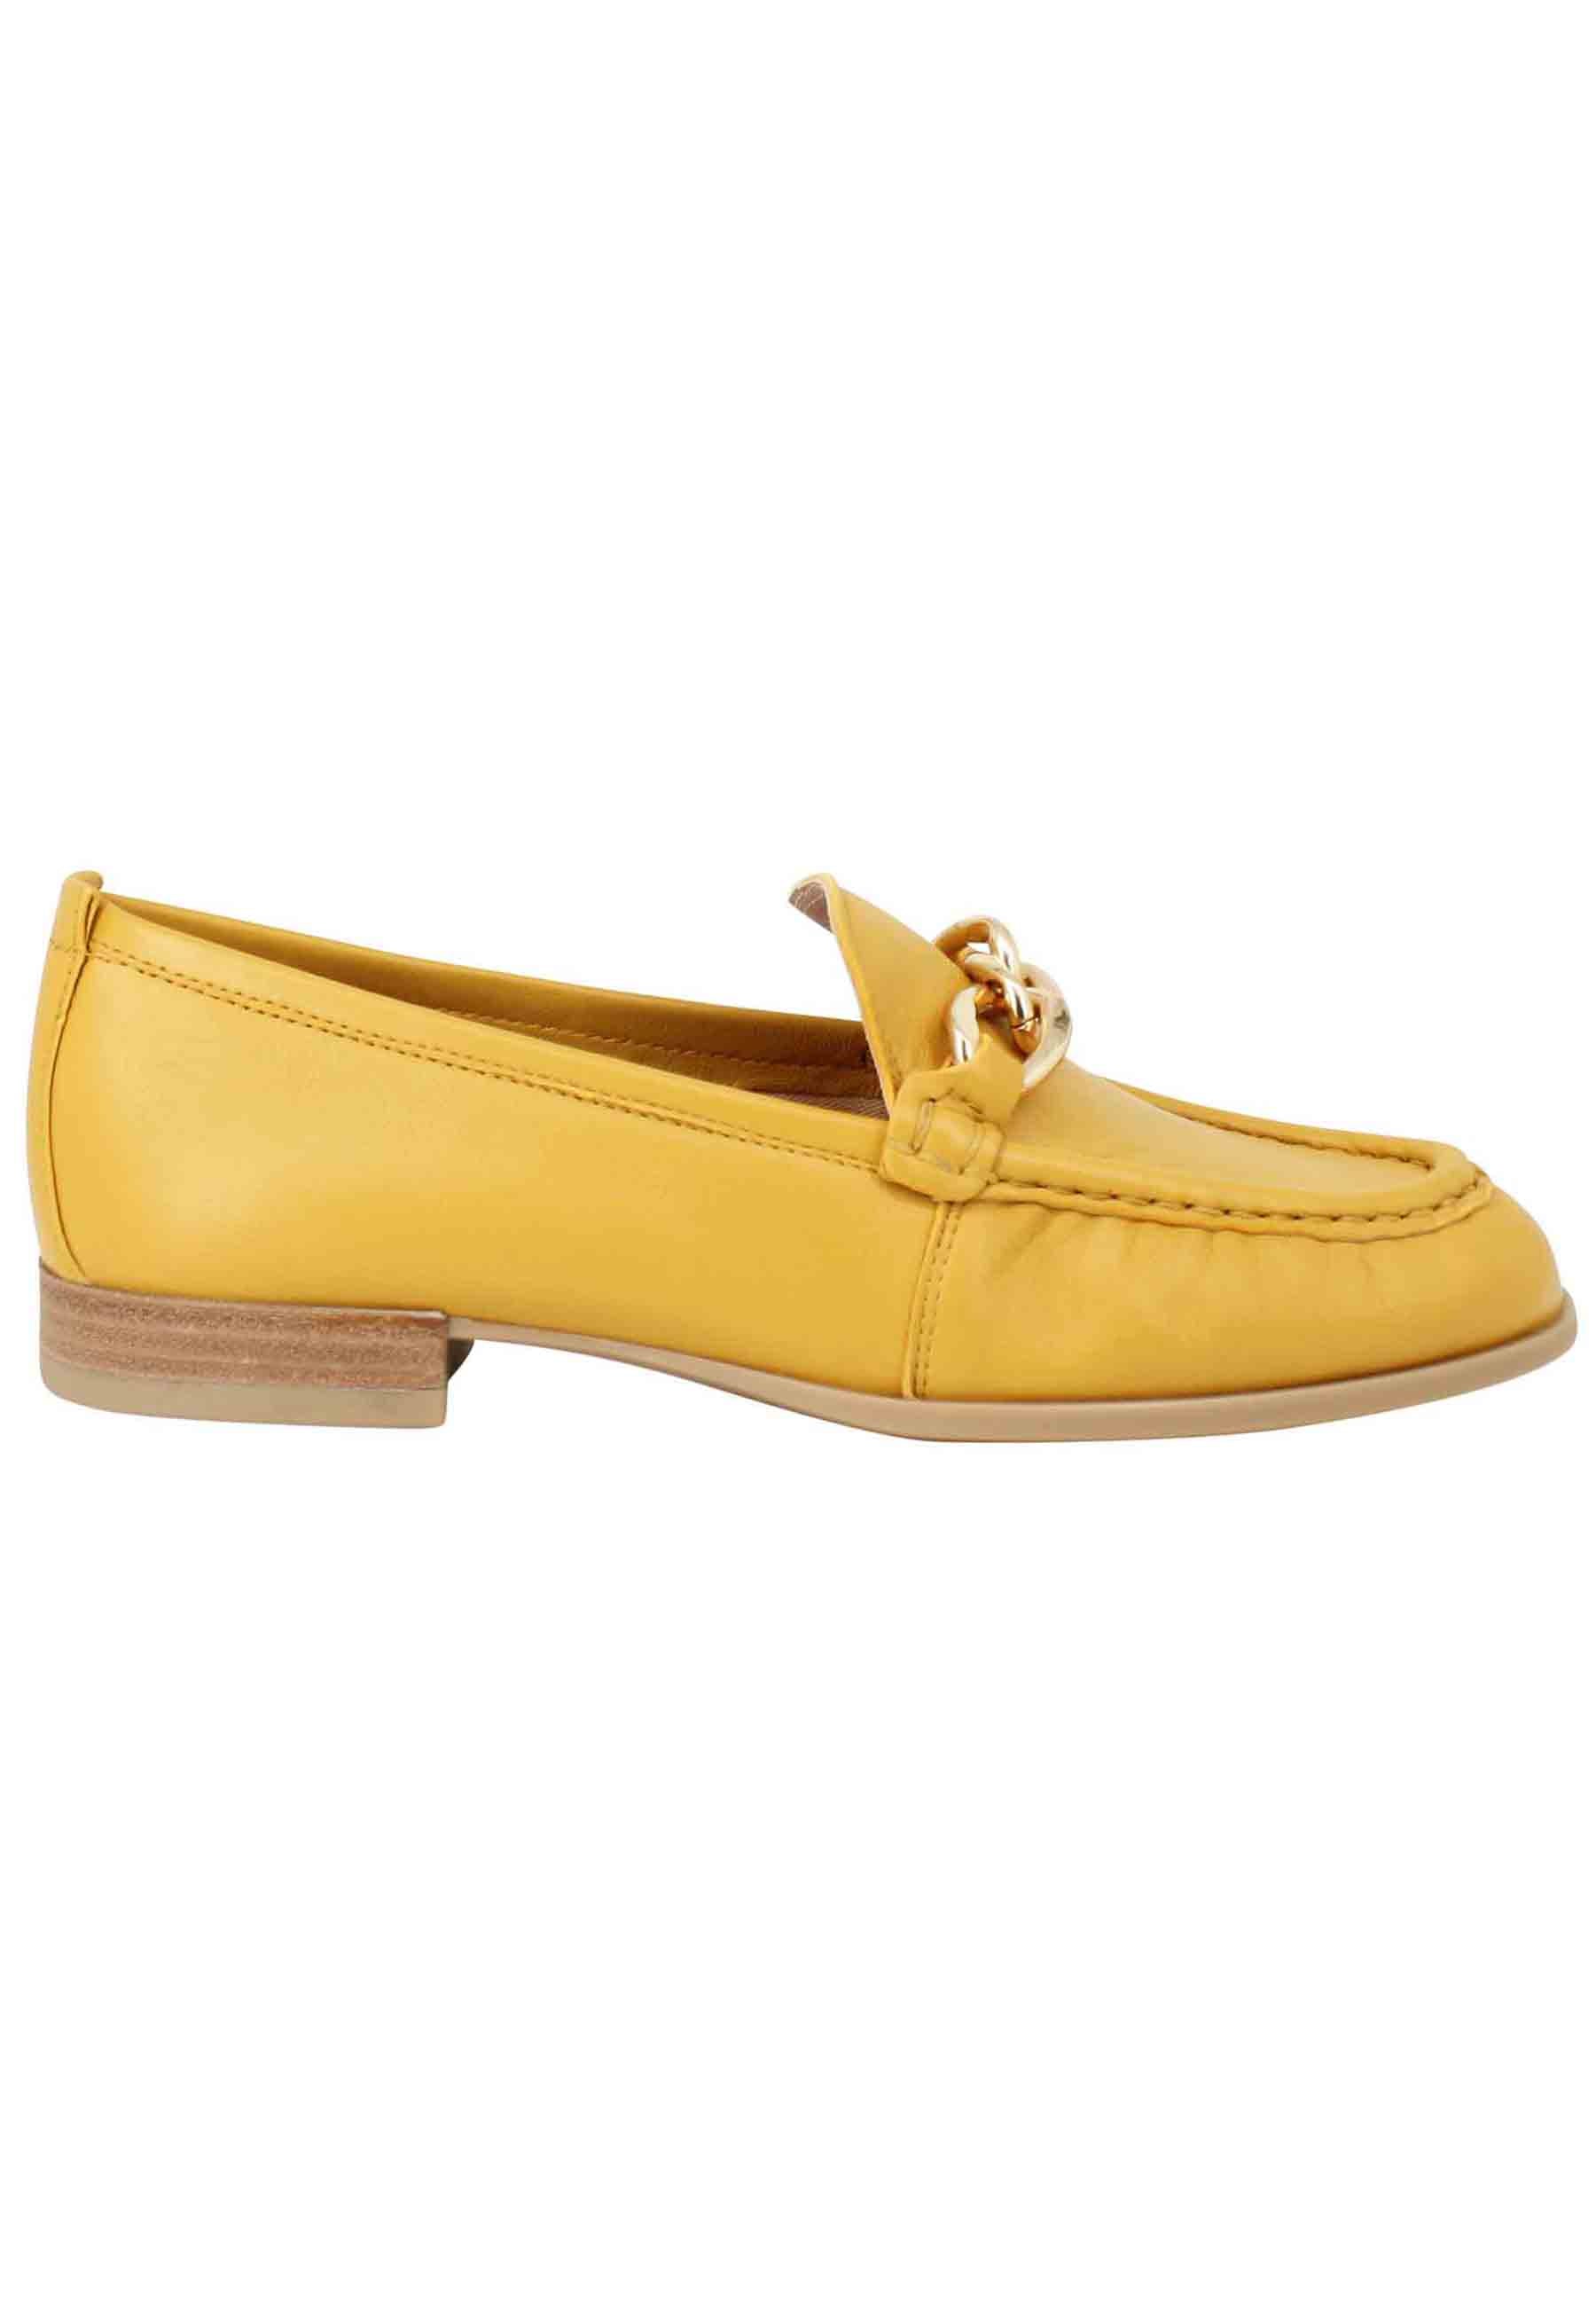 Women's loafers in gold laminated leather with round toe and low heel